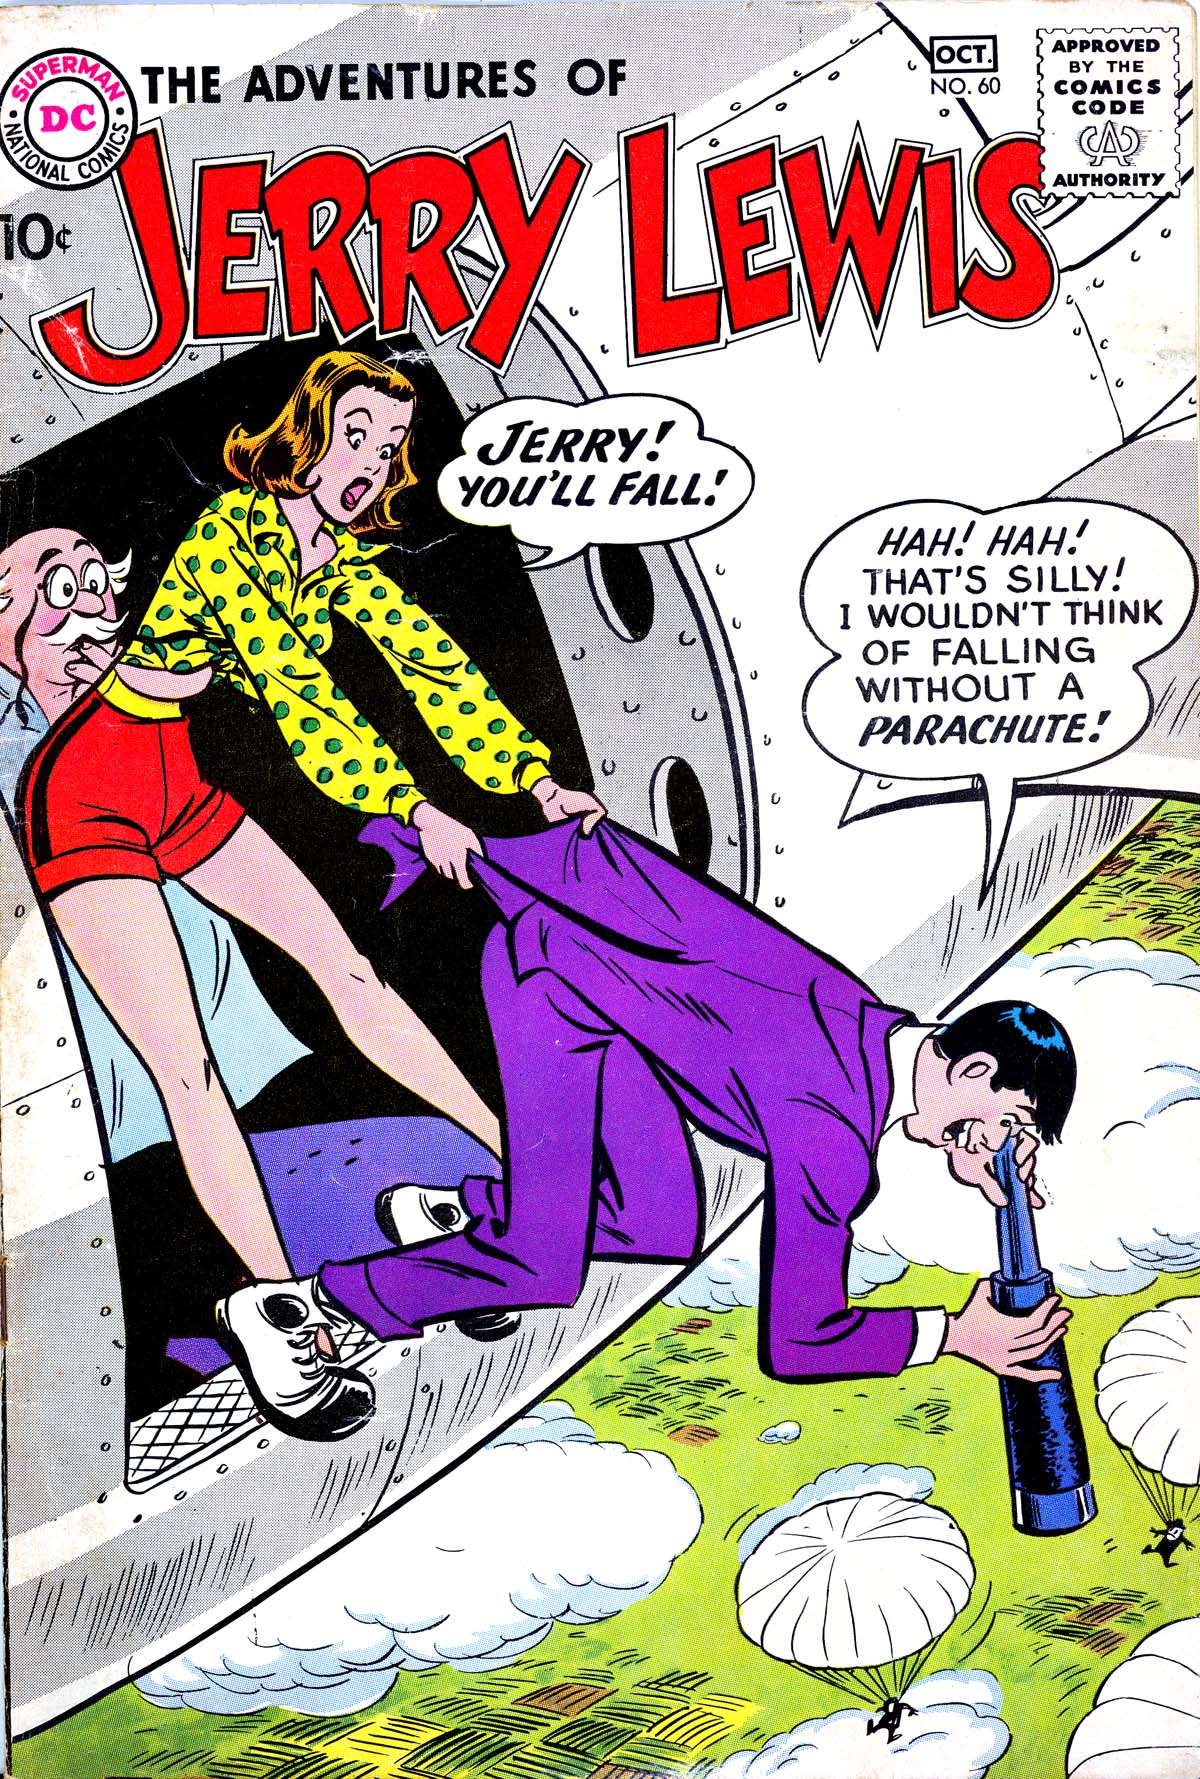 Read online The Adventures of Jerry Lewis comic -  Issue #60 - 1